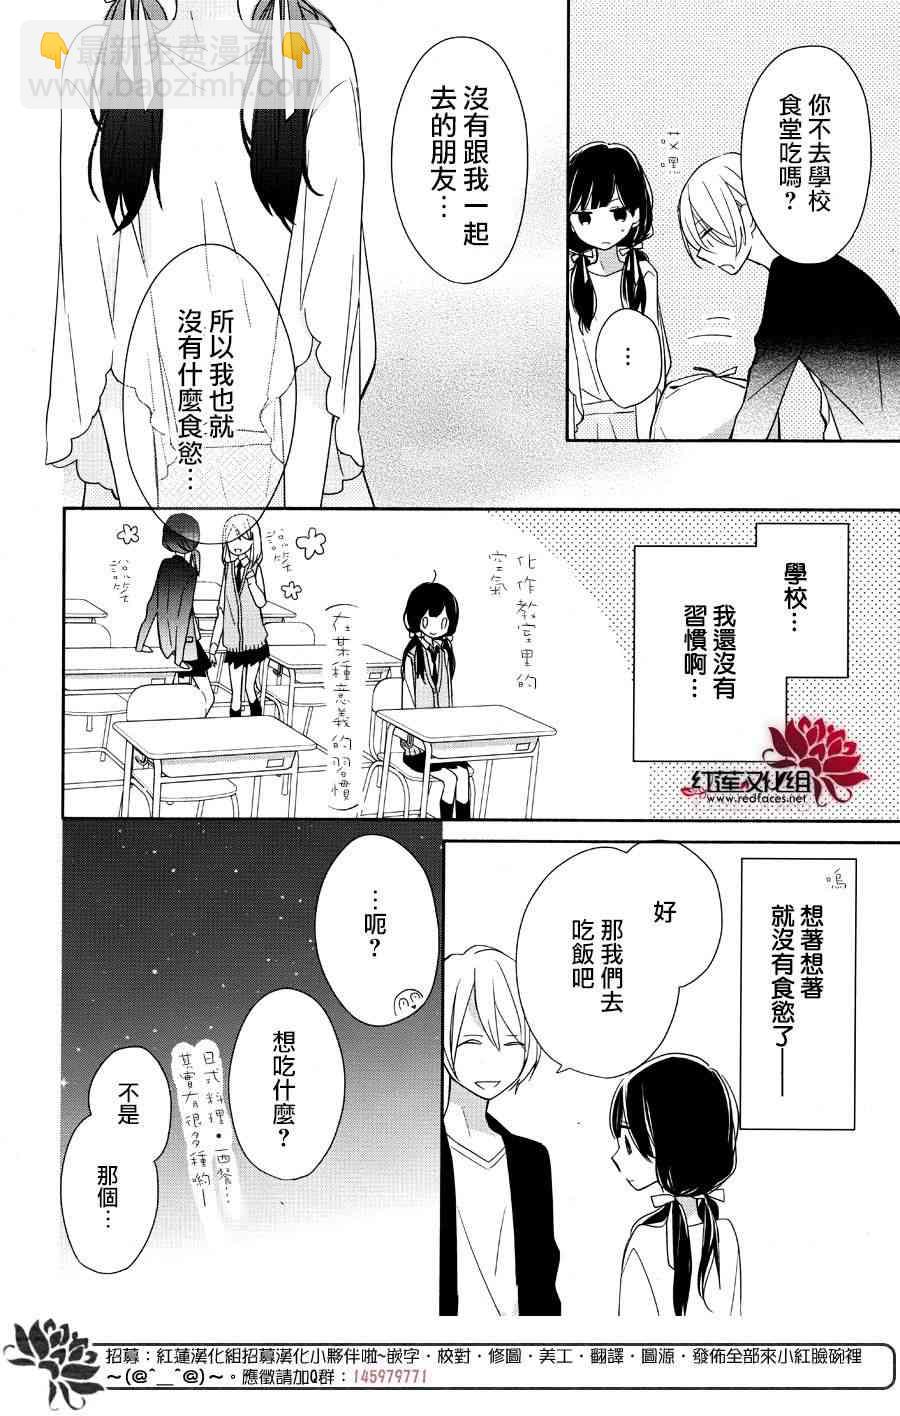 If given a second chance - 2話 - 4